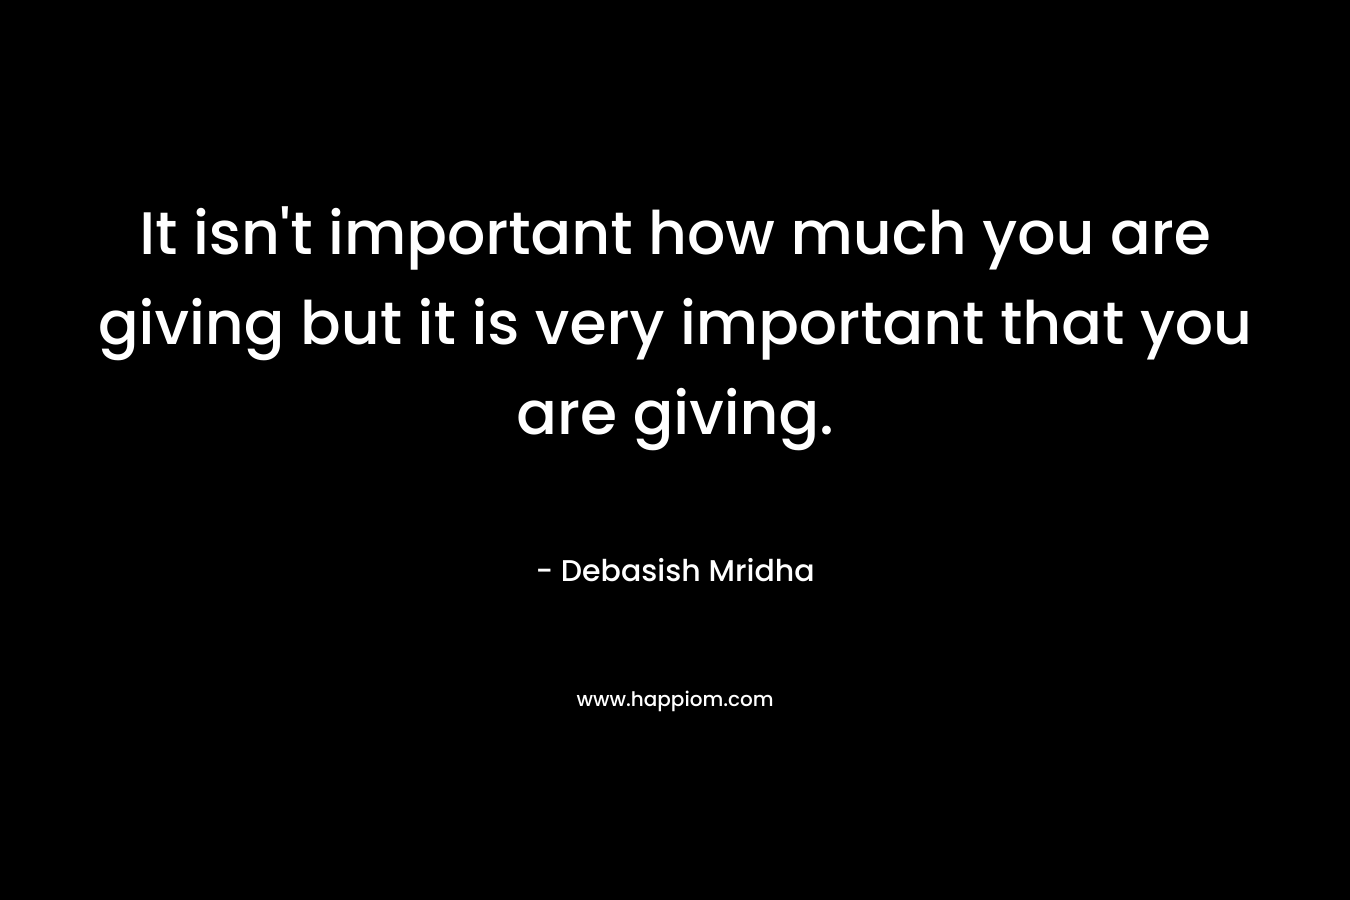 It isn't important how much you are giving but it is very important that you are giving.